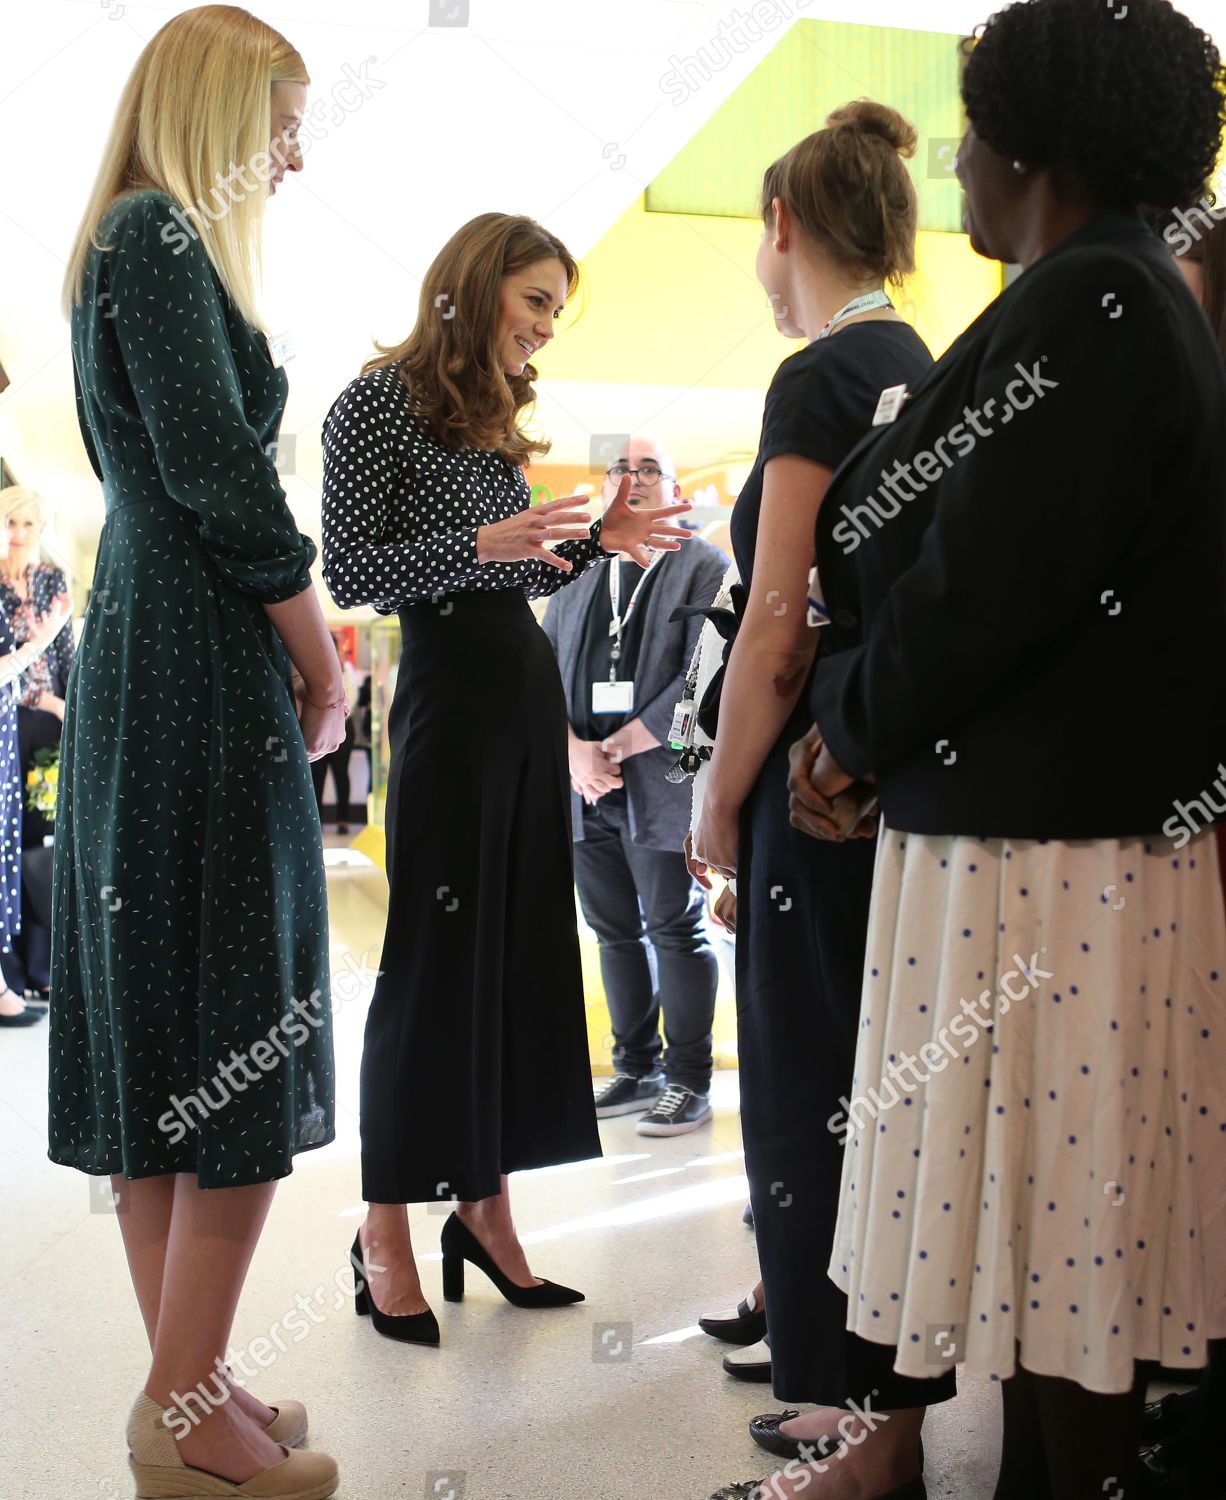 catherine-duchess-of-cambridge-visits-sunshine-house-children-and-young-peoples-health-and-development-centre-peckham-london-uk-shutterstock-editorial-10418221a.jpg